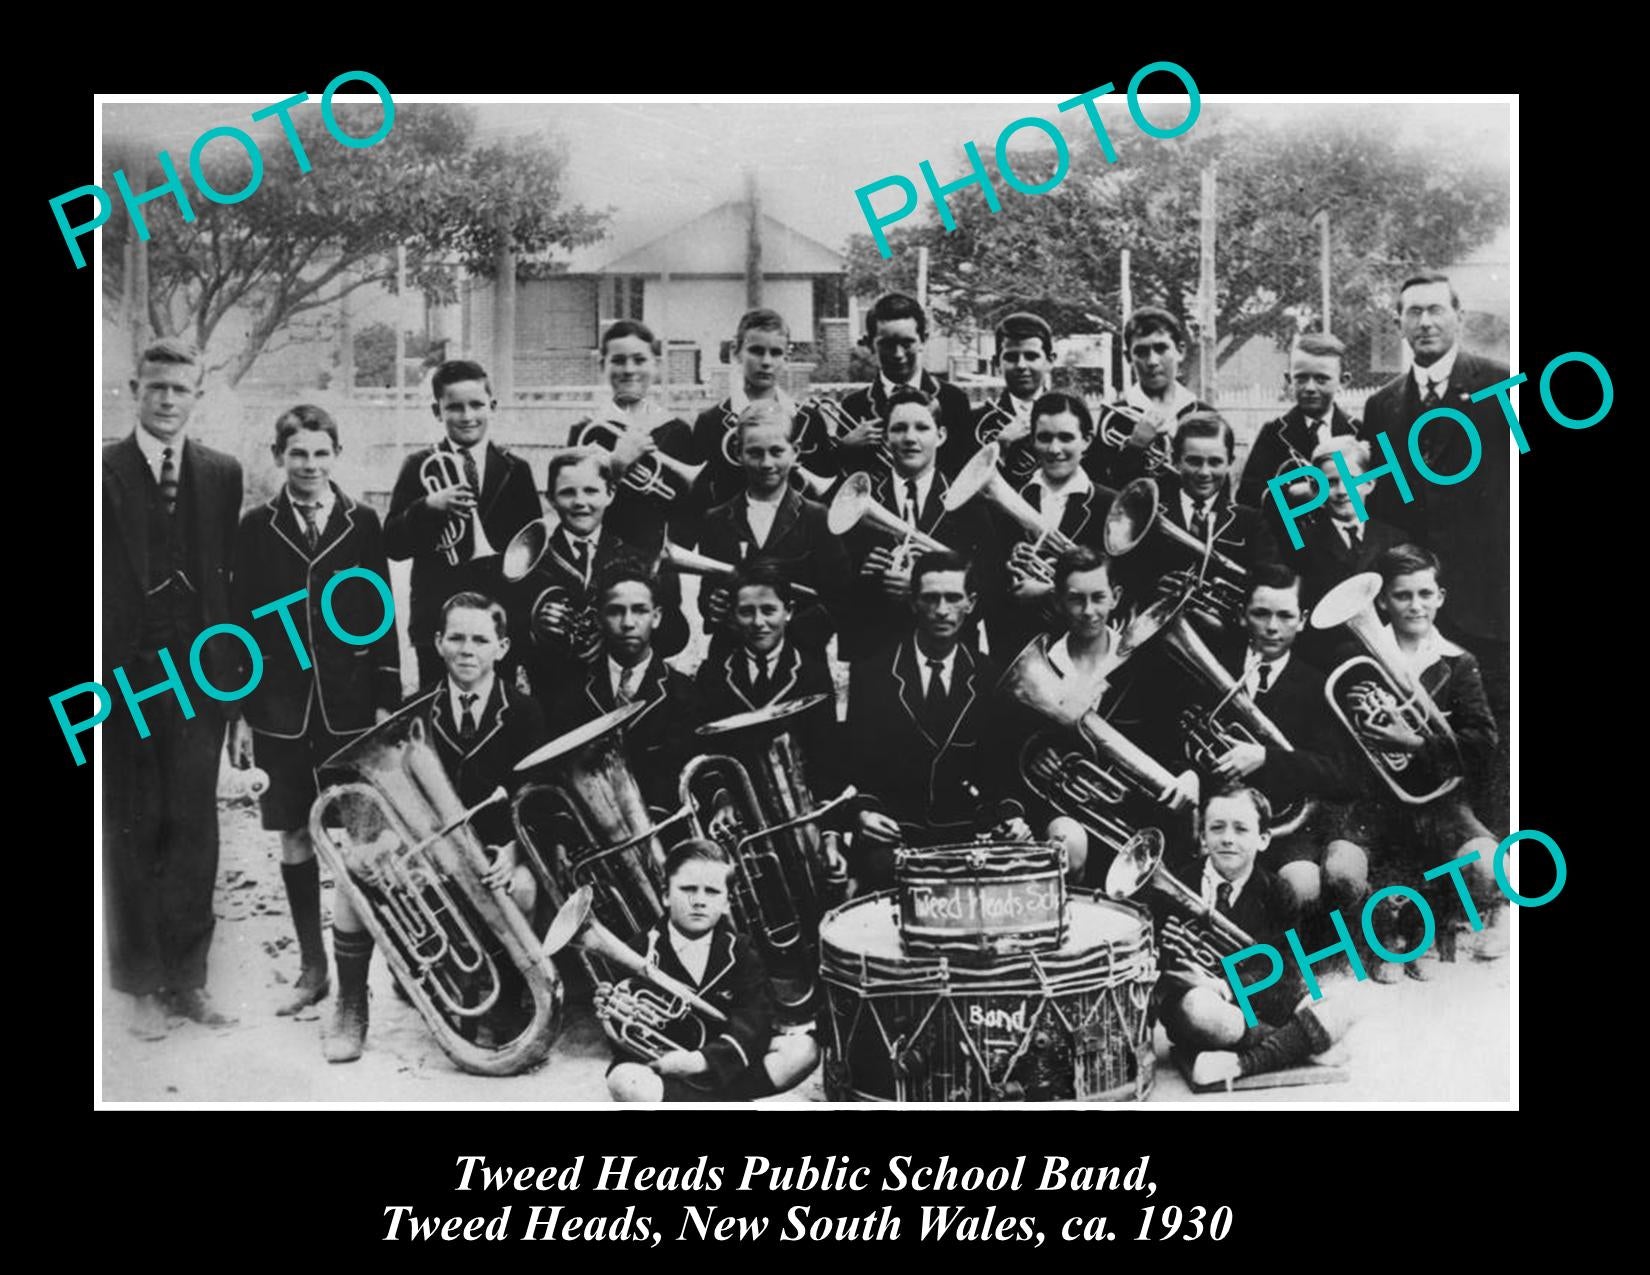 OLD LARGE HISTORIC PHOTO OF TWEED HEADS PUBLIC SCHOOL BAND c1930 NSW